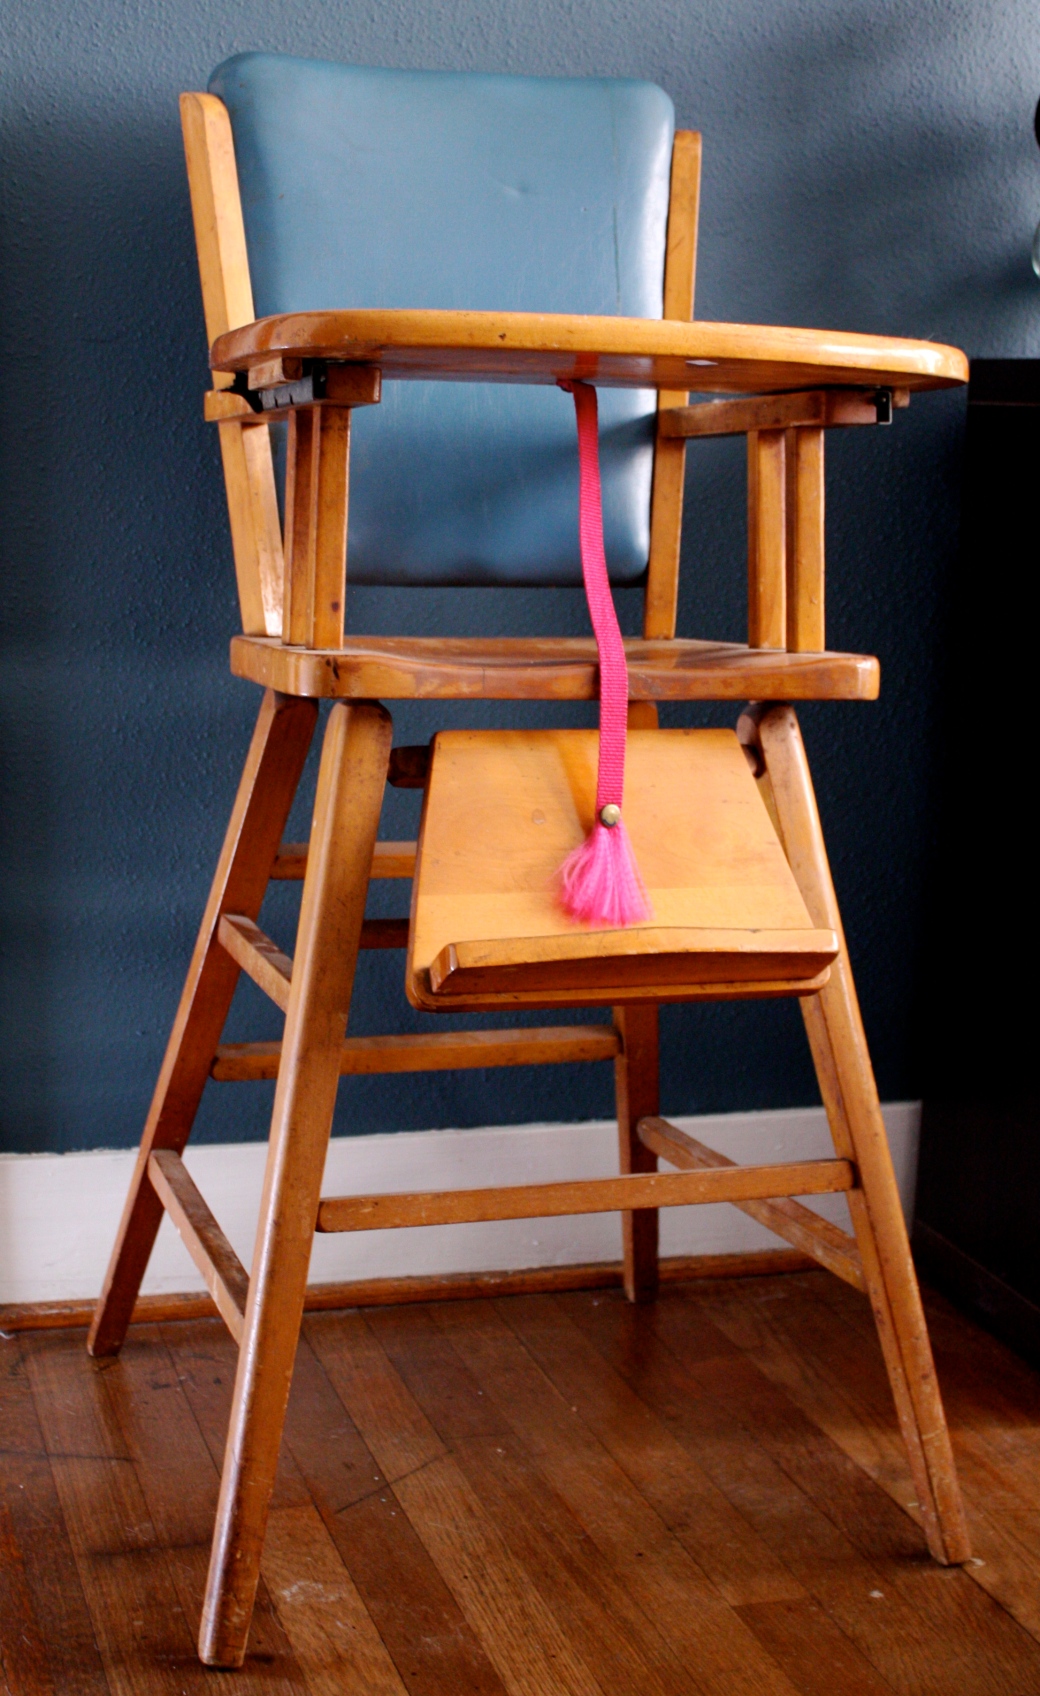 High Chair Plans Free how to make money woodworking from 